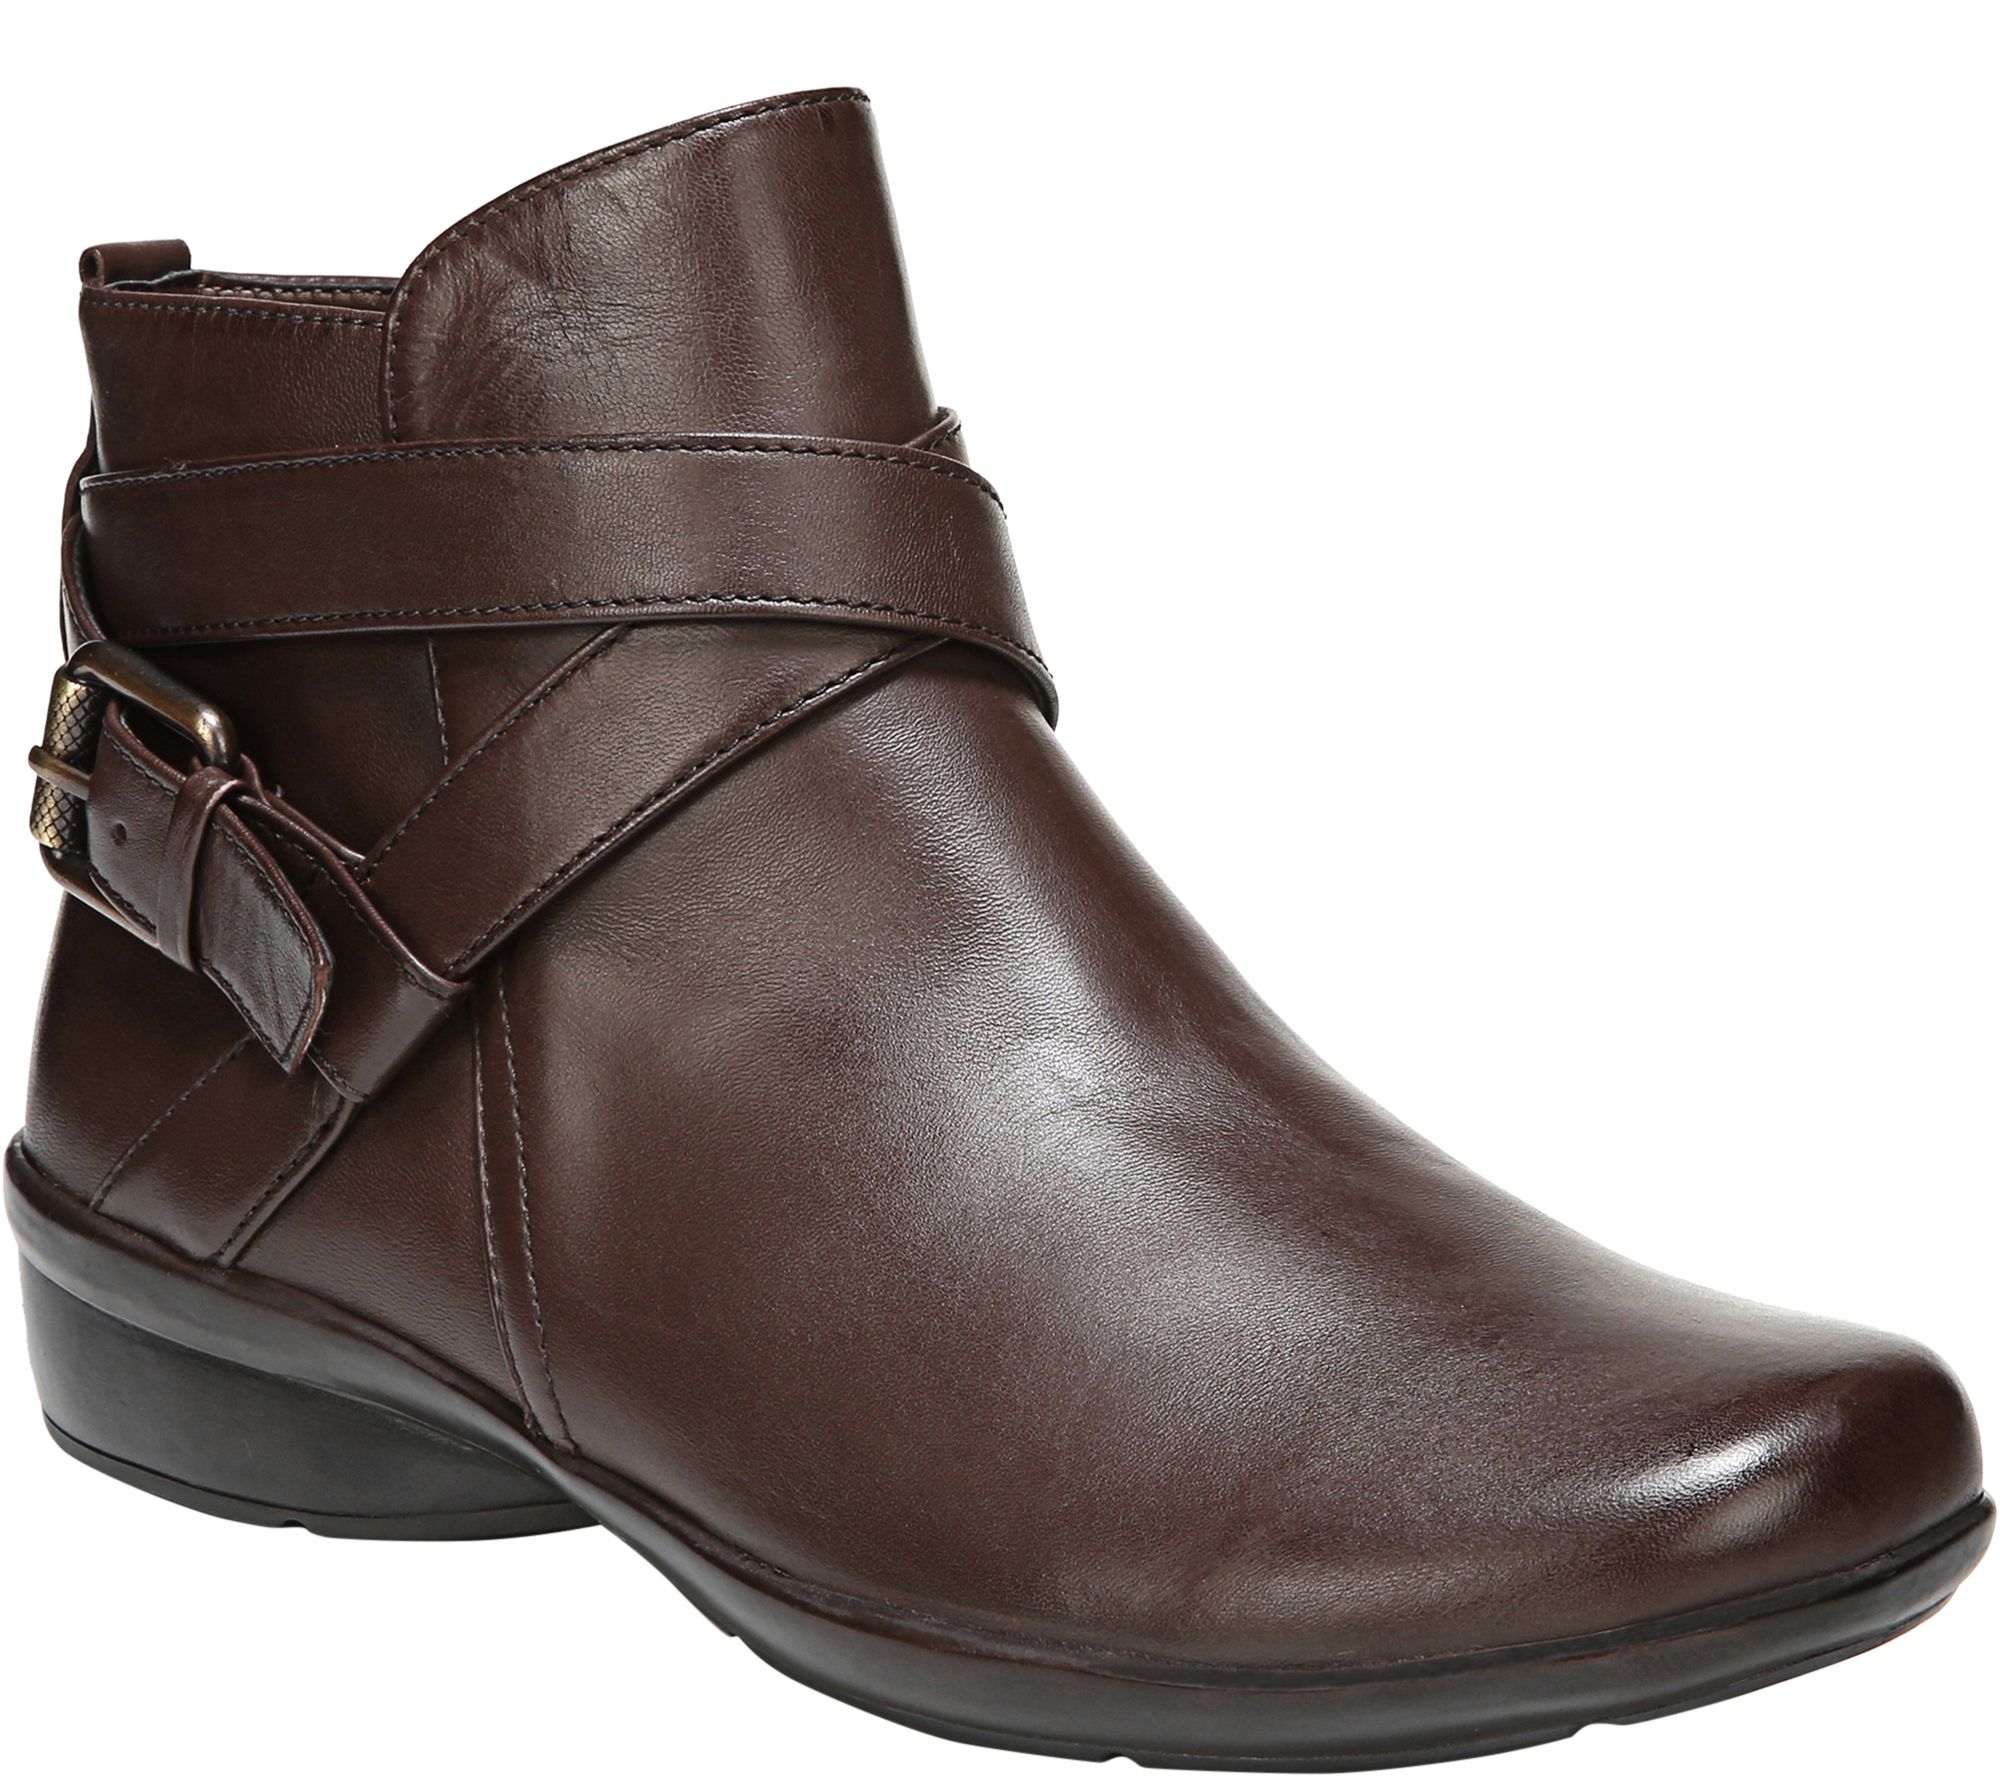 Naturalizer Leather Ankle - QVC.com